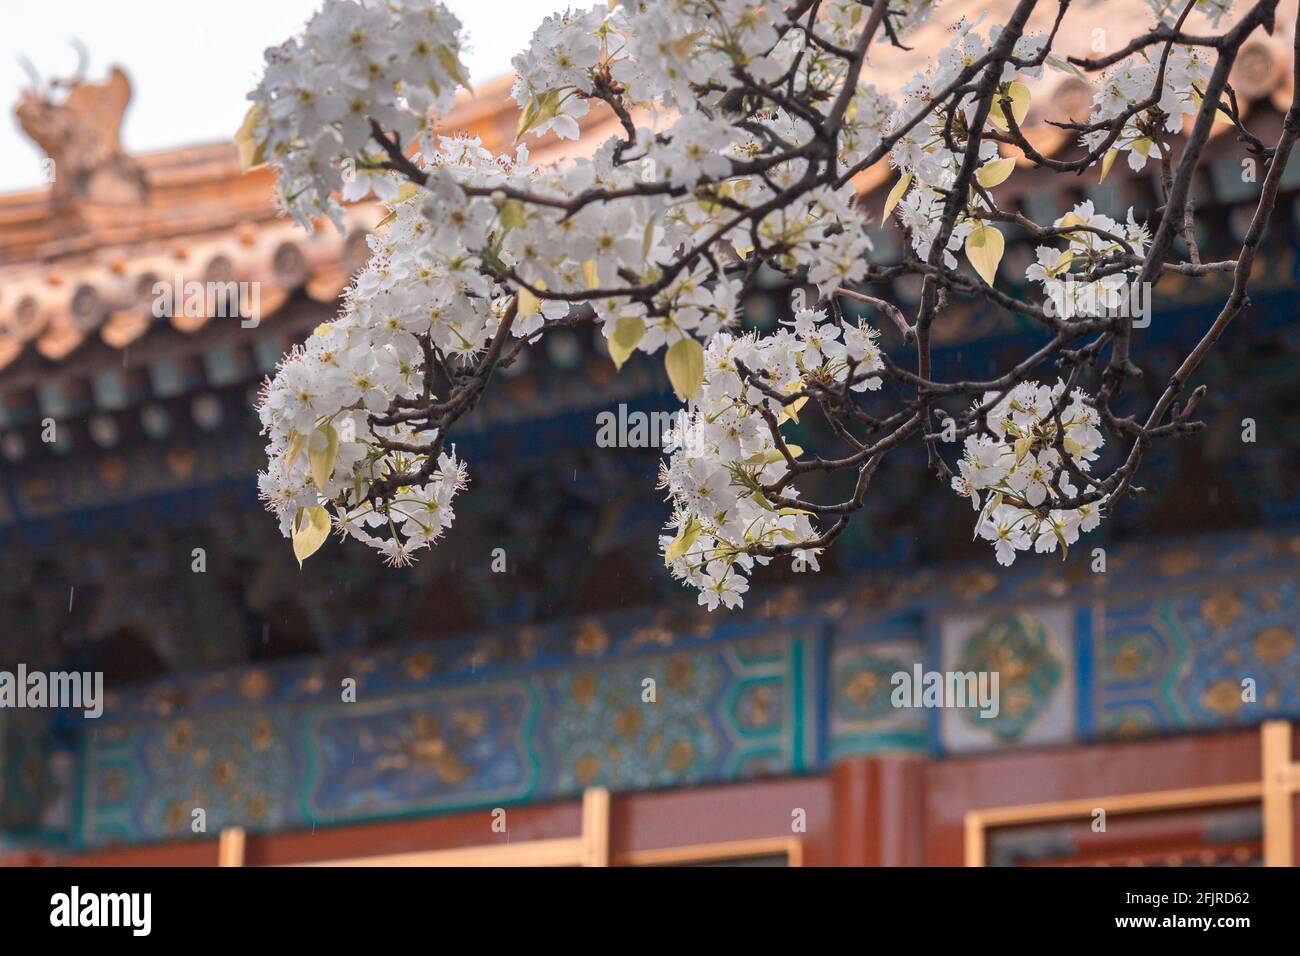 White pear blossoms, pyrus flowers against ancient Chinese building with yellow tile roof in the Forbidden City, Beijing, China Stock Photo